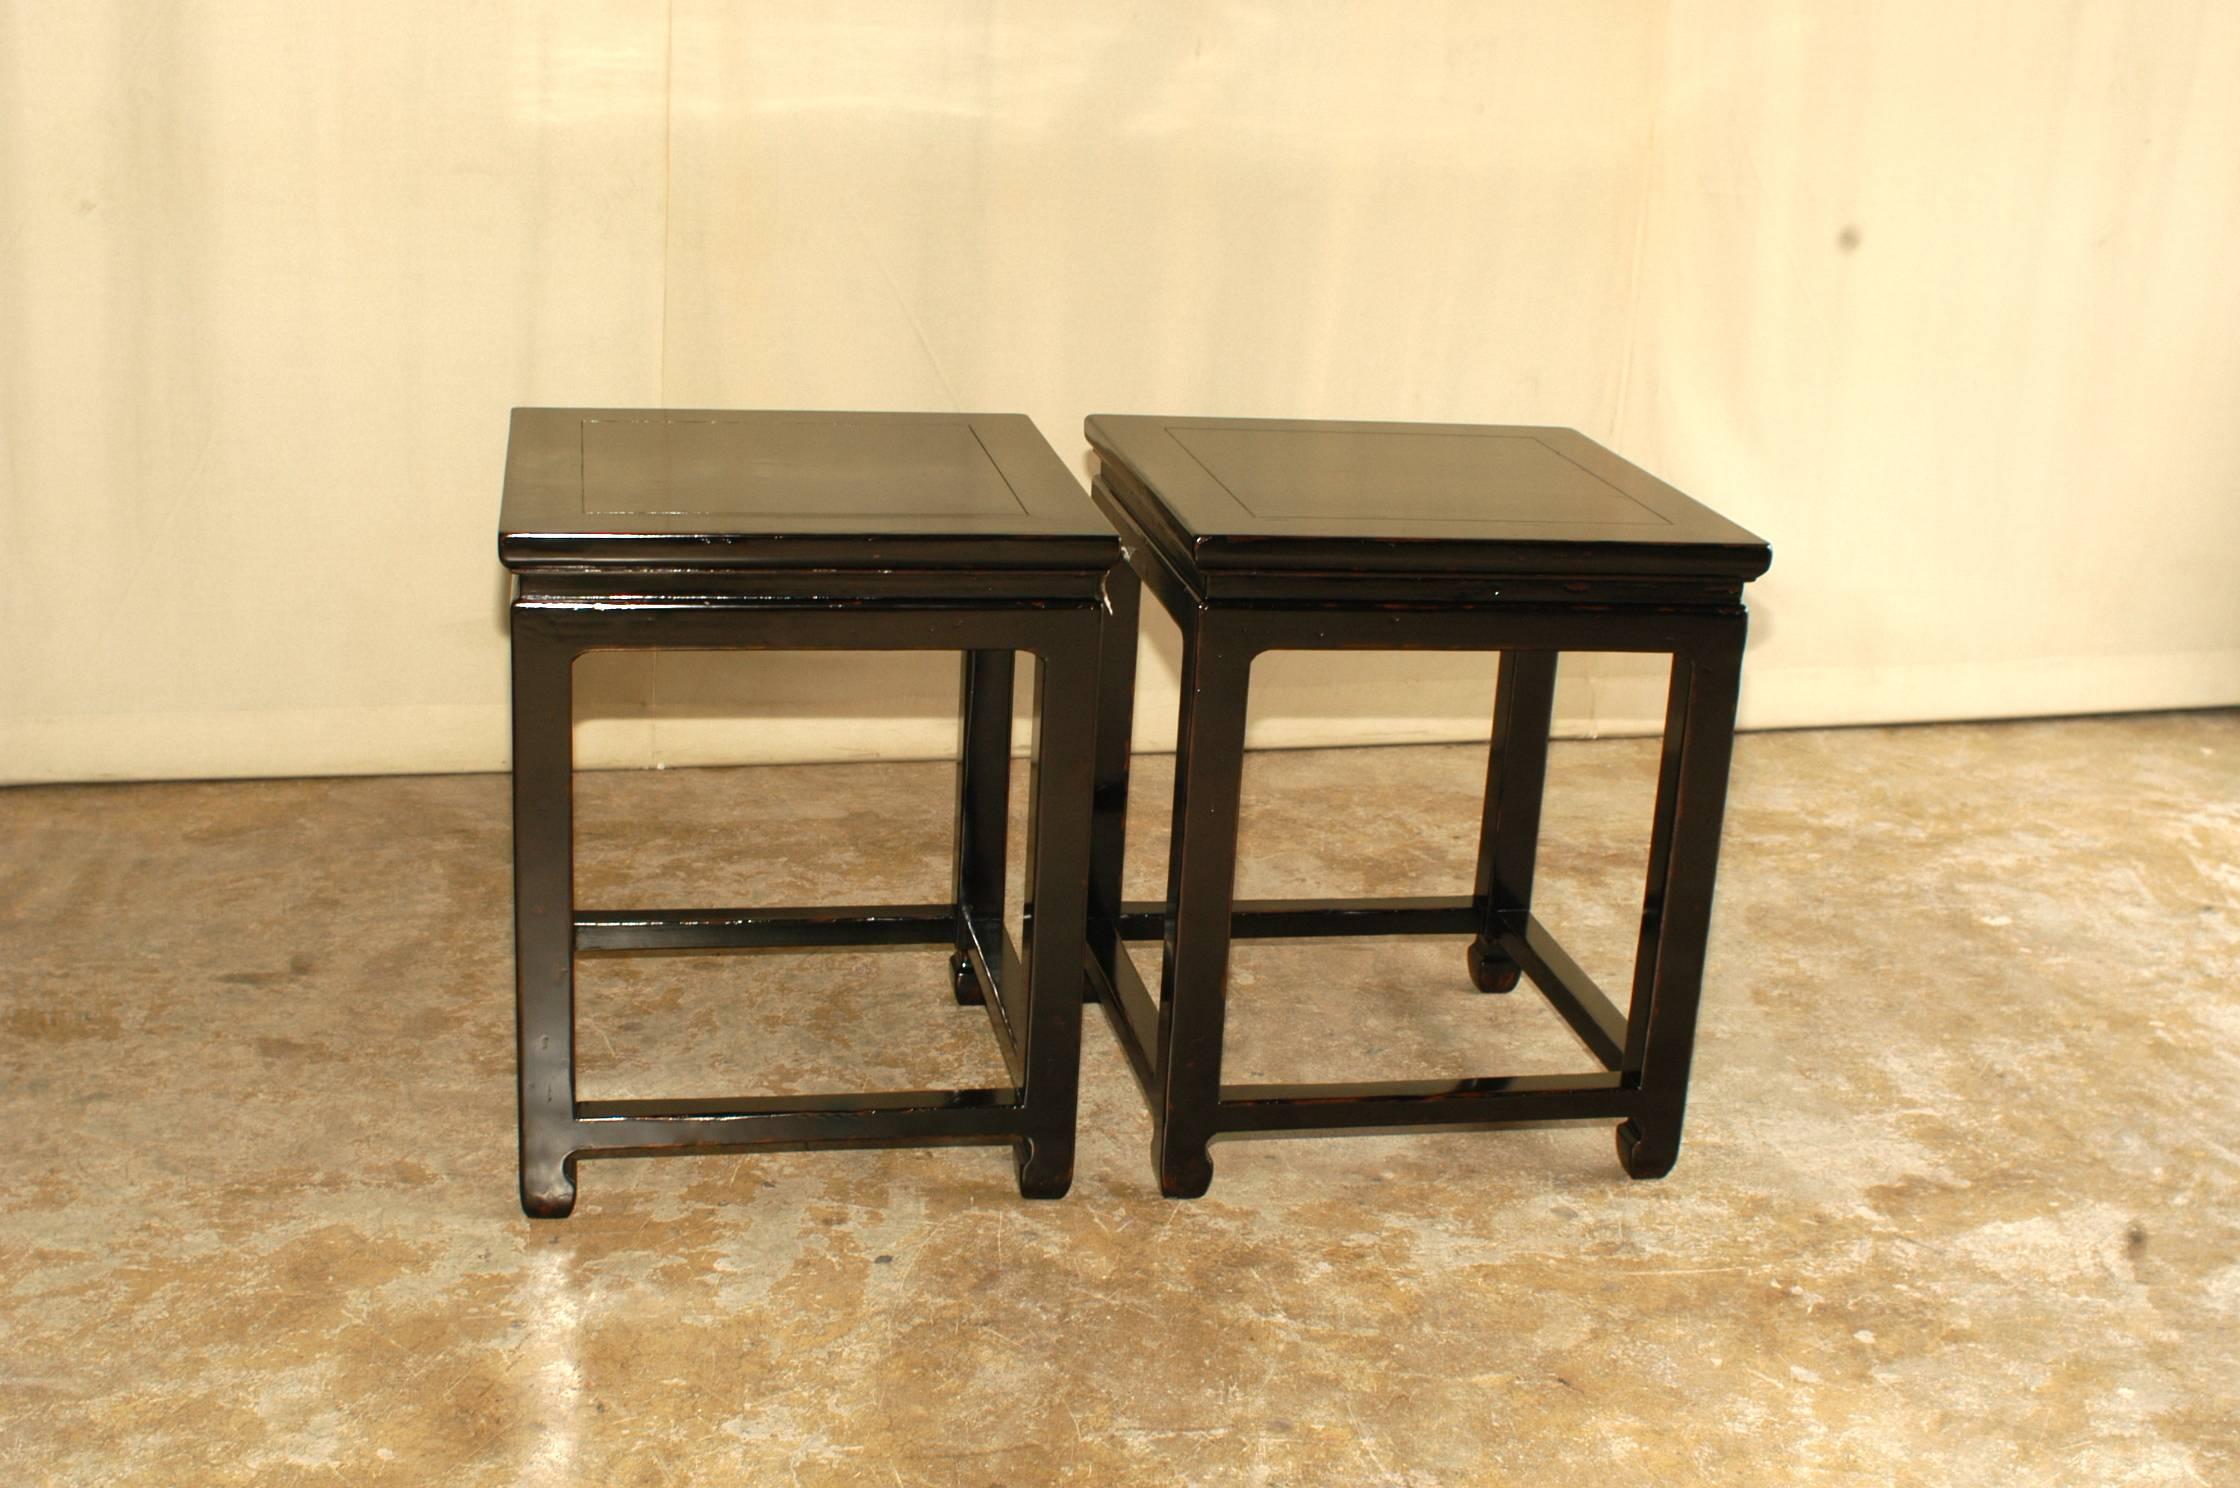  pair of refined and elegant black lacquer square end tables, beautiful color, form and lines.